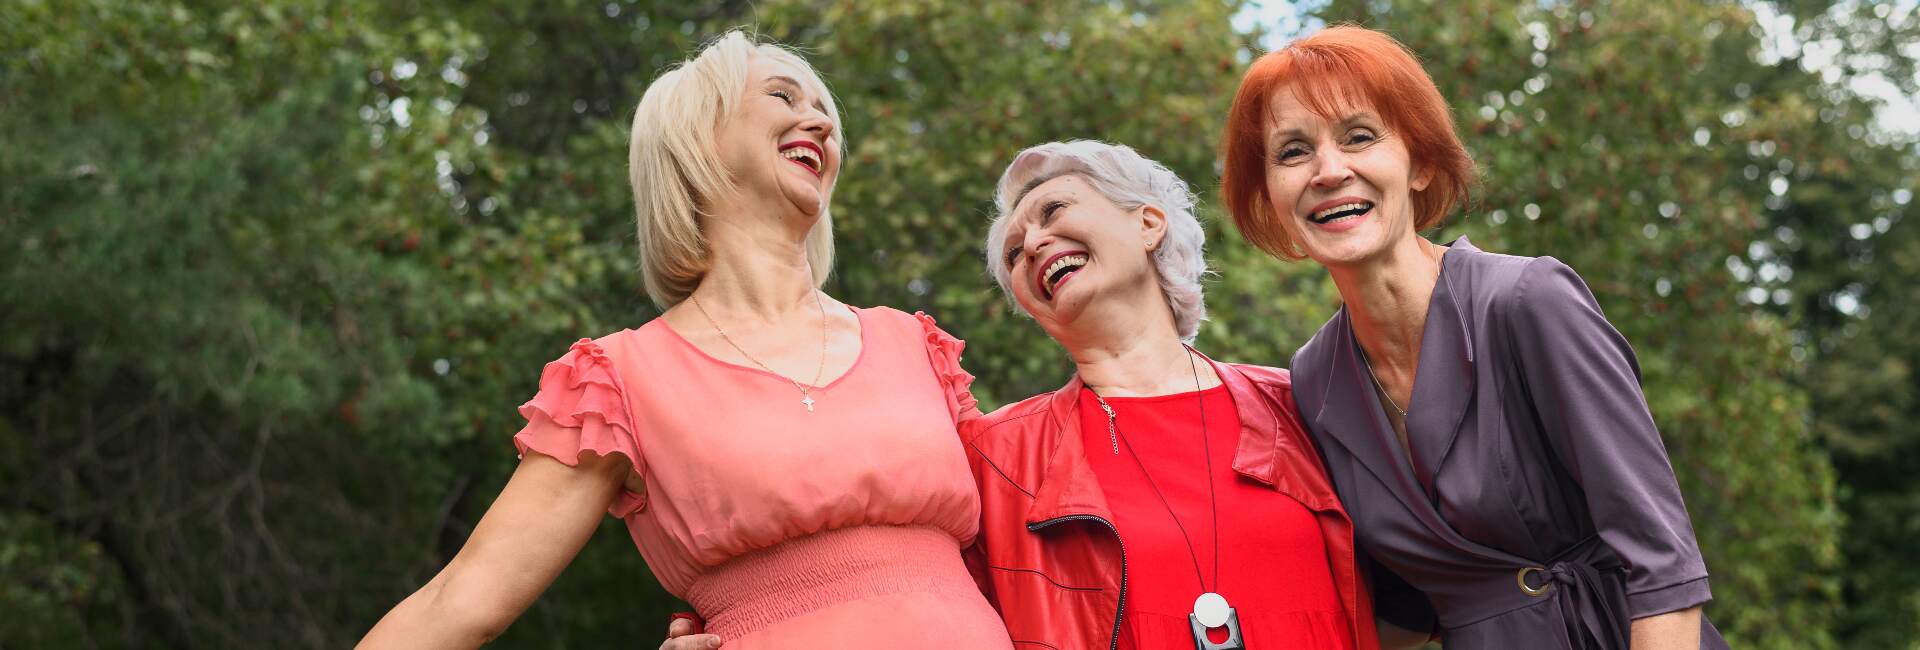 three senior women laugh and enjoy time together outdoors